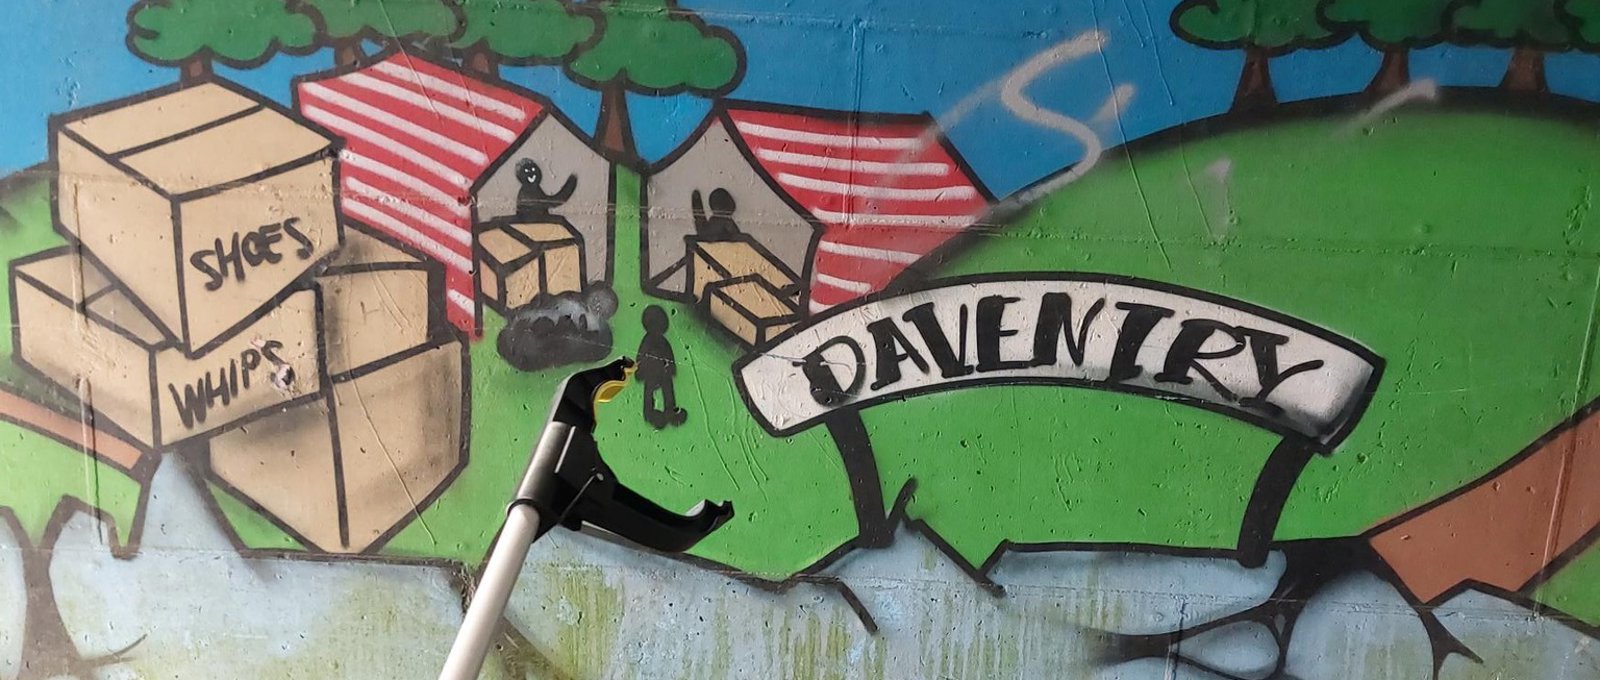 A photo of a litter picker tool in front of graffiti on a wall. The graffiti has a sign saying 'Daventry' with fields and people in tents and cardboard boxes.